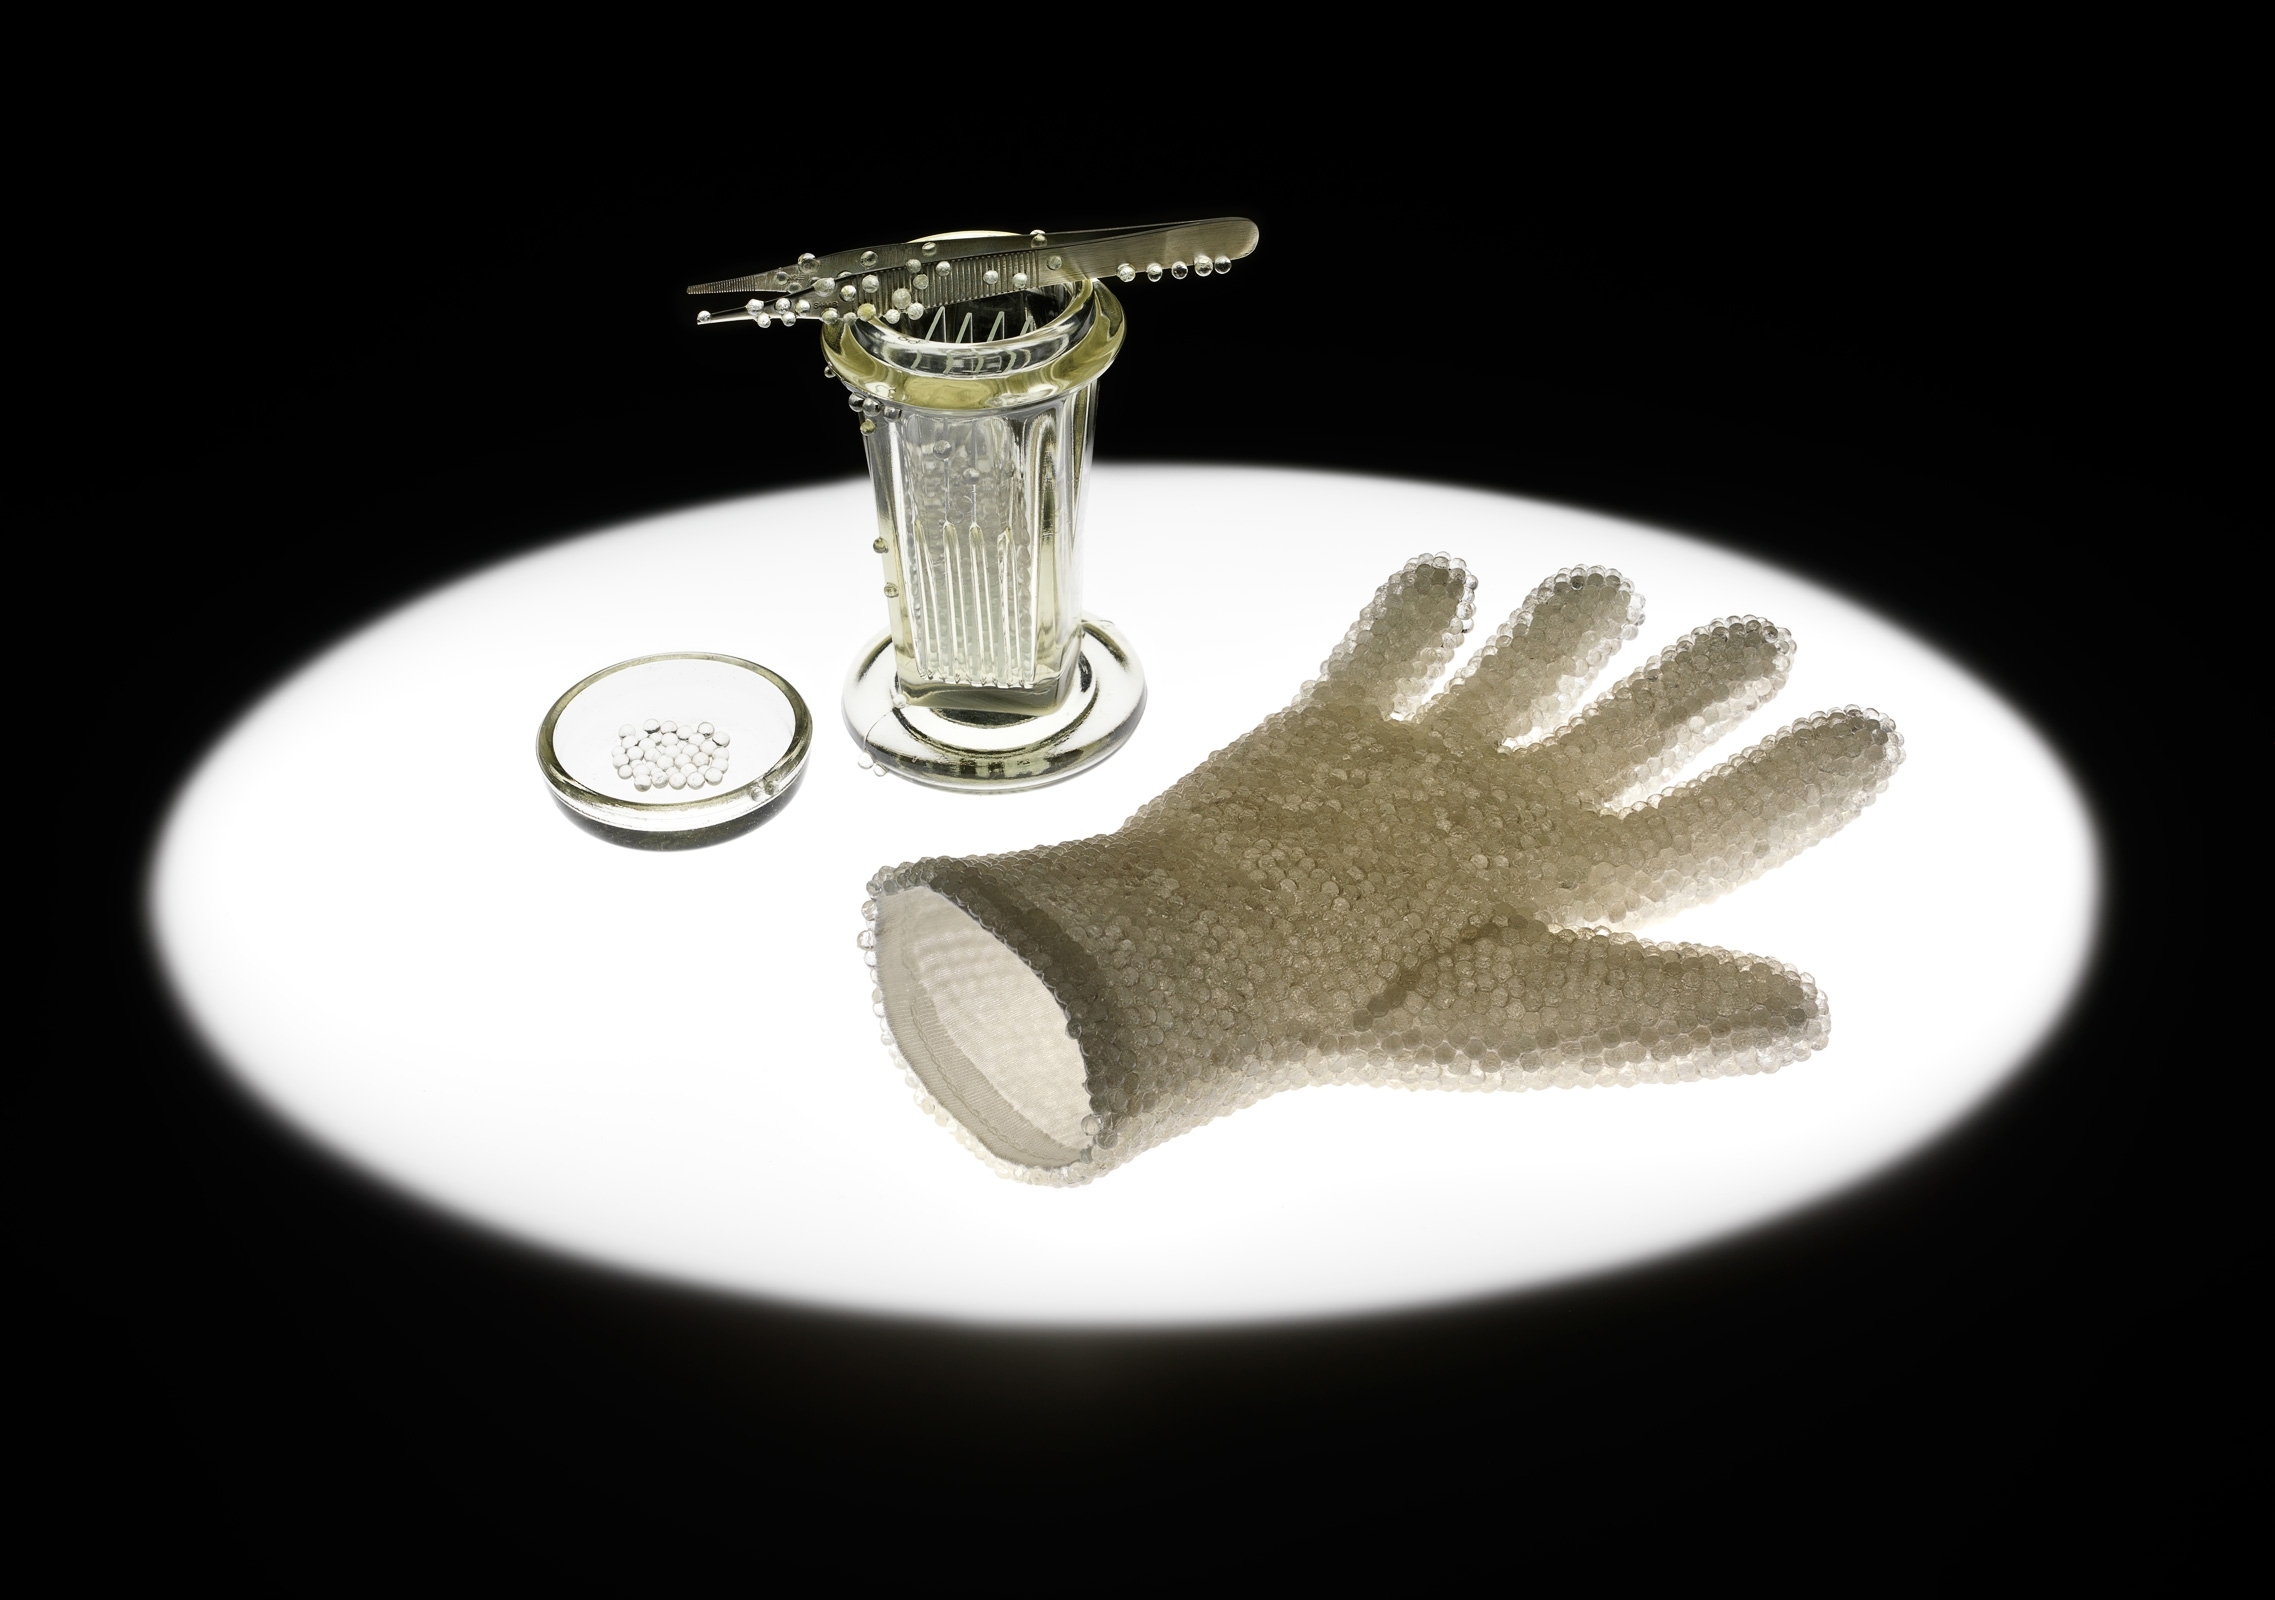  Catherine Truman,  In Preparation for Seeing : Cell Culture Glove , 2015, white cotton glove encrusted with glass spheres, Coplin jar, microscope slides, steel forceps inlaid with glass spheres, light pad, dimensions variable. Image Grant Hancock.  